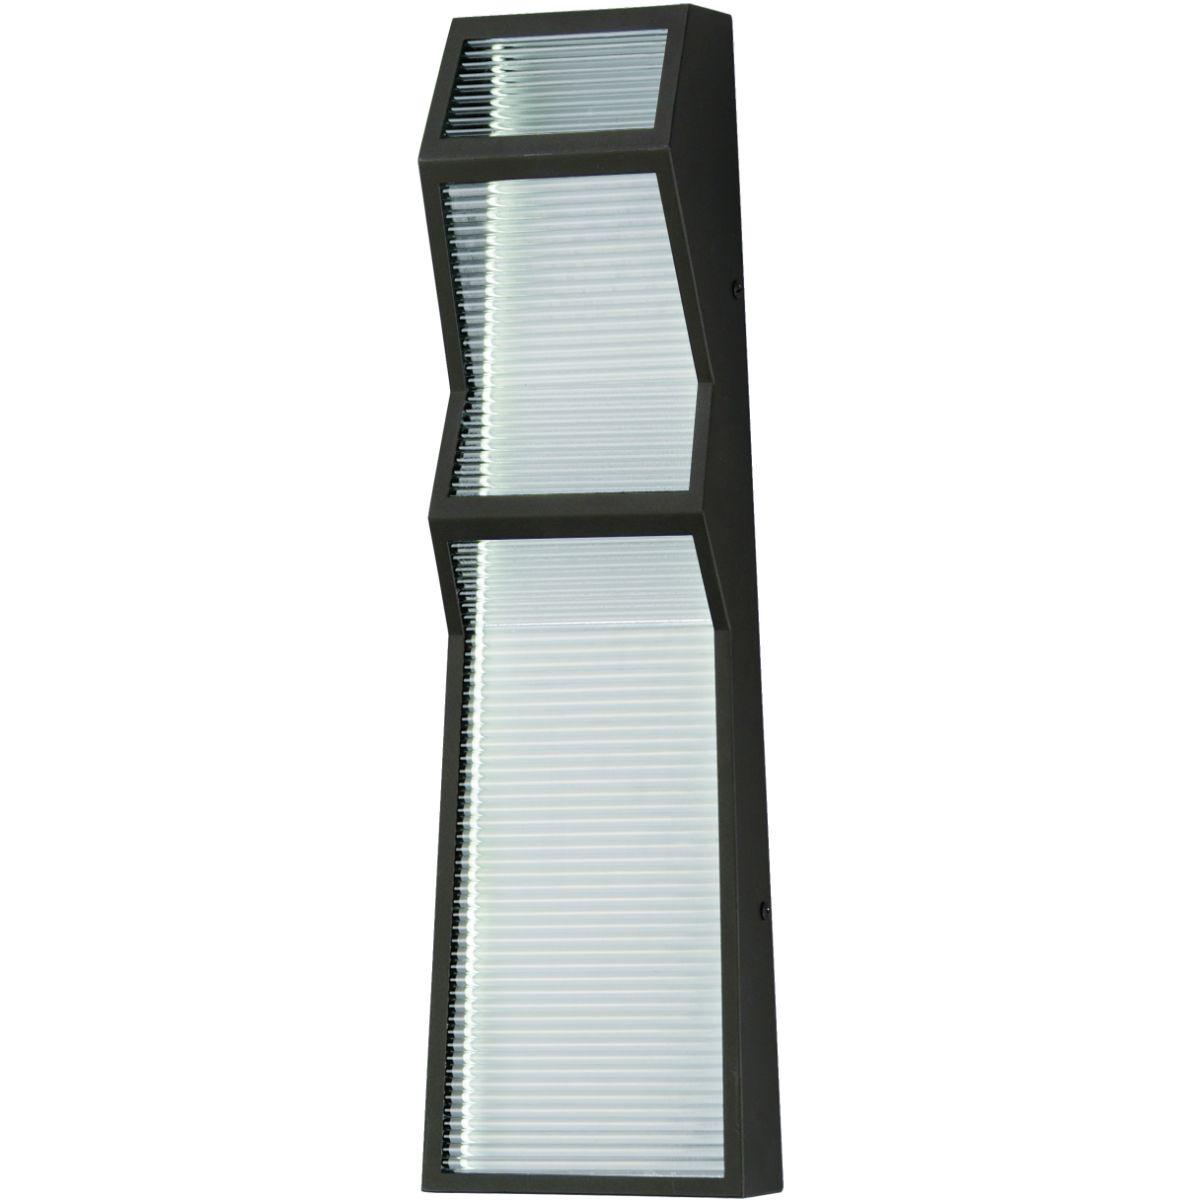 Totem 20 in. LED Outdoor Wall Sconce 3000K Black Finish